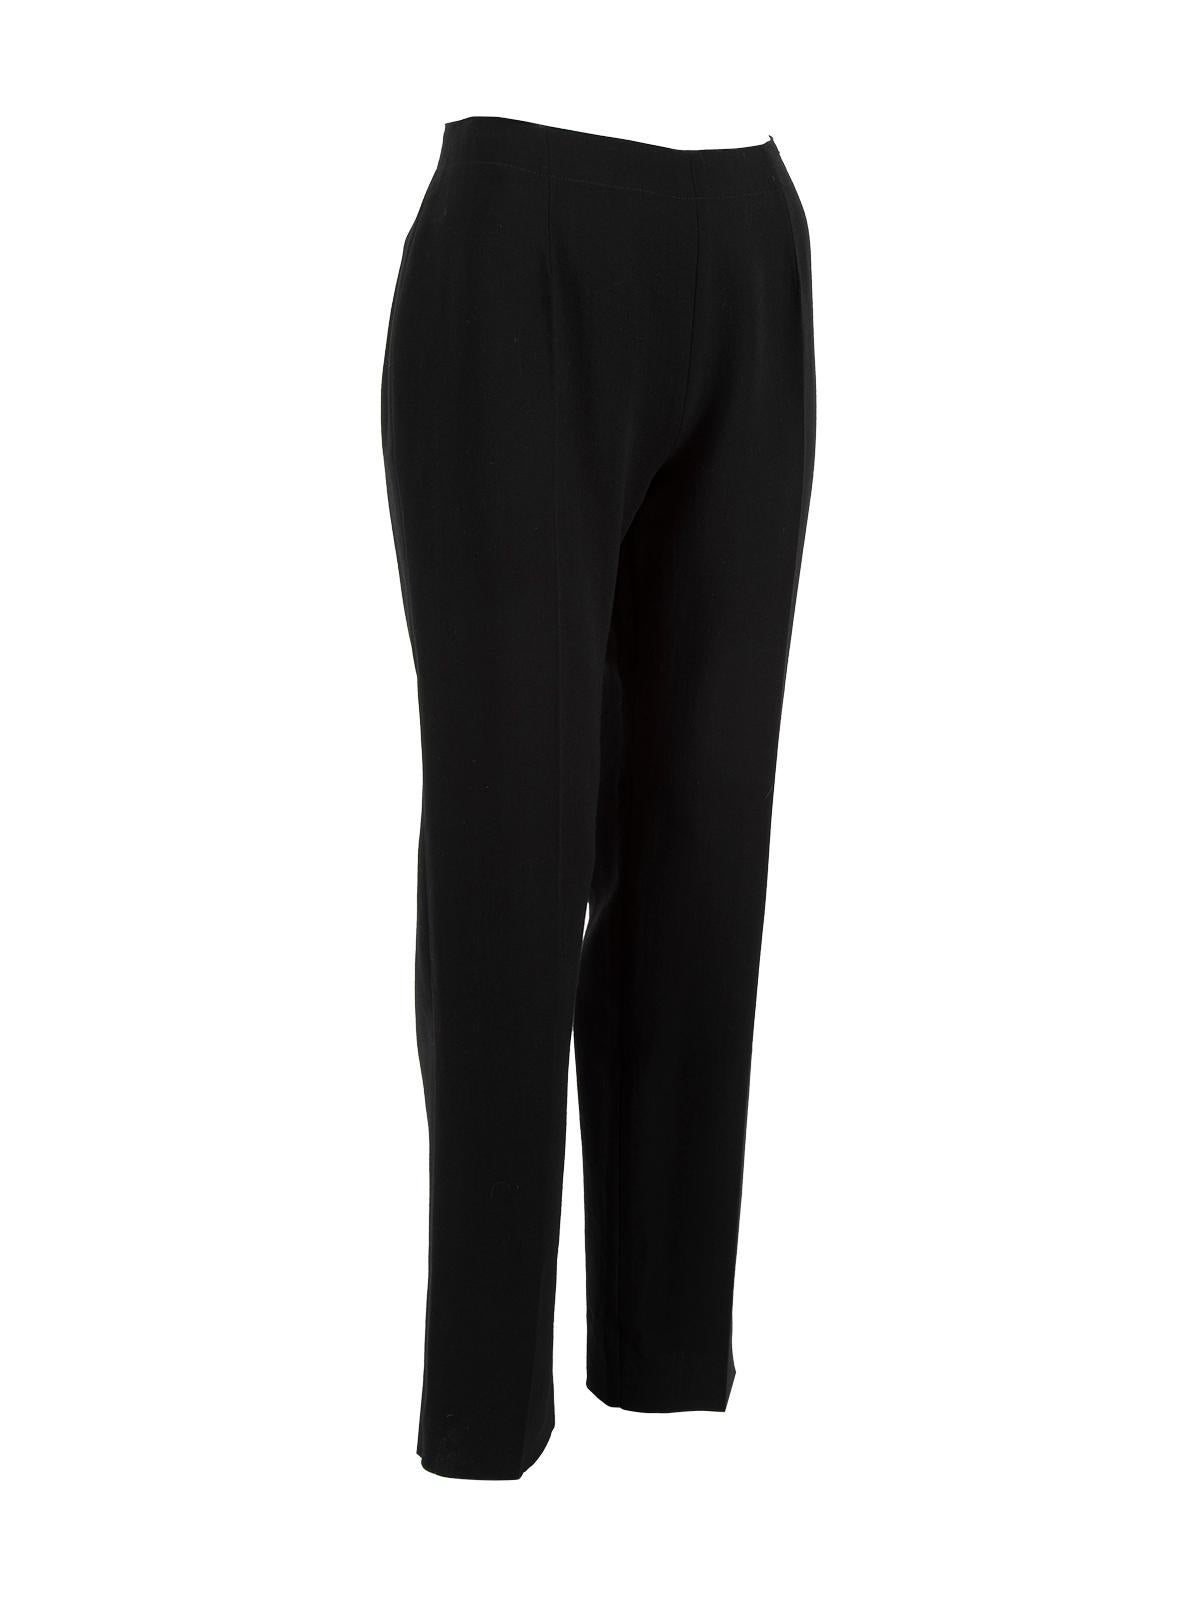 CONDITION is Never worn, with tags. No visible wear to trousers is evident on this new Alaia designer resale item. Details Black Wool Side zip High rise Workwear Made in FRANCE Composition 99% WOOL, 1% POLYAMIDE Care instructions: Professional dry